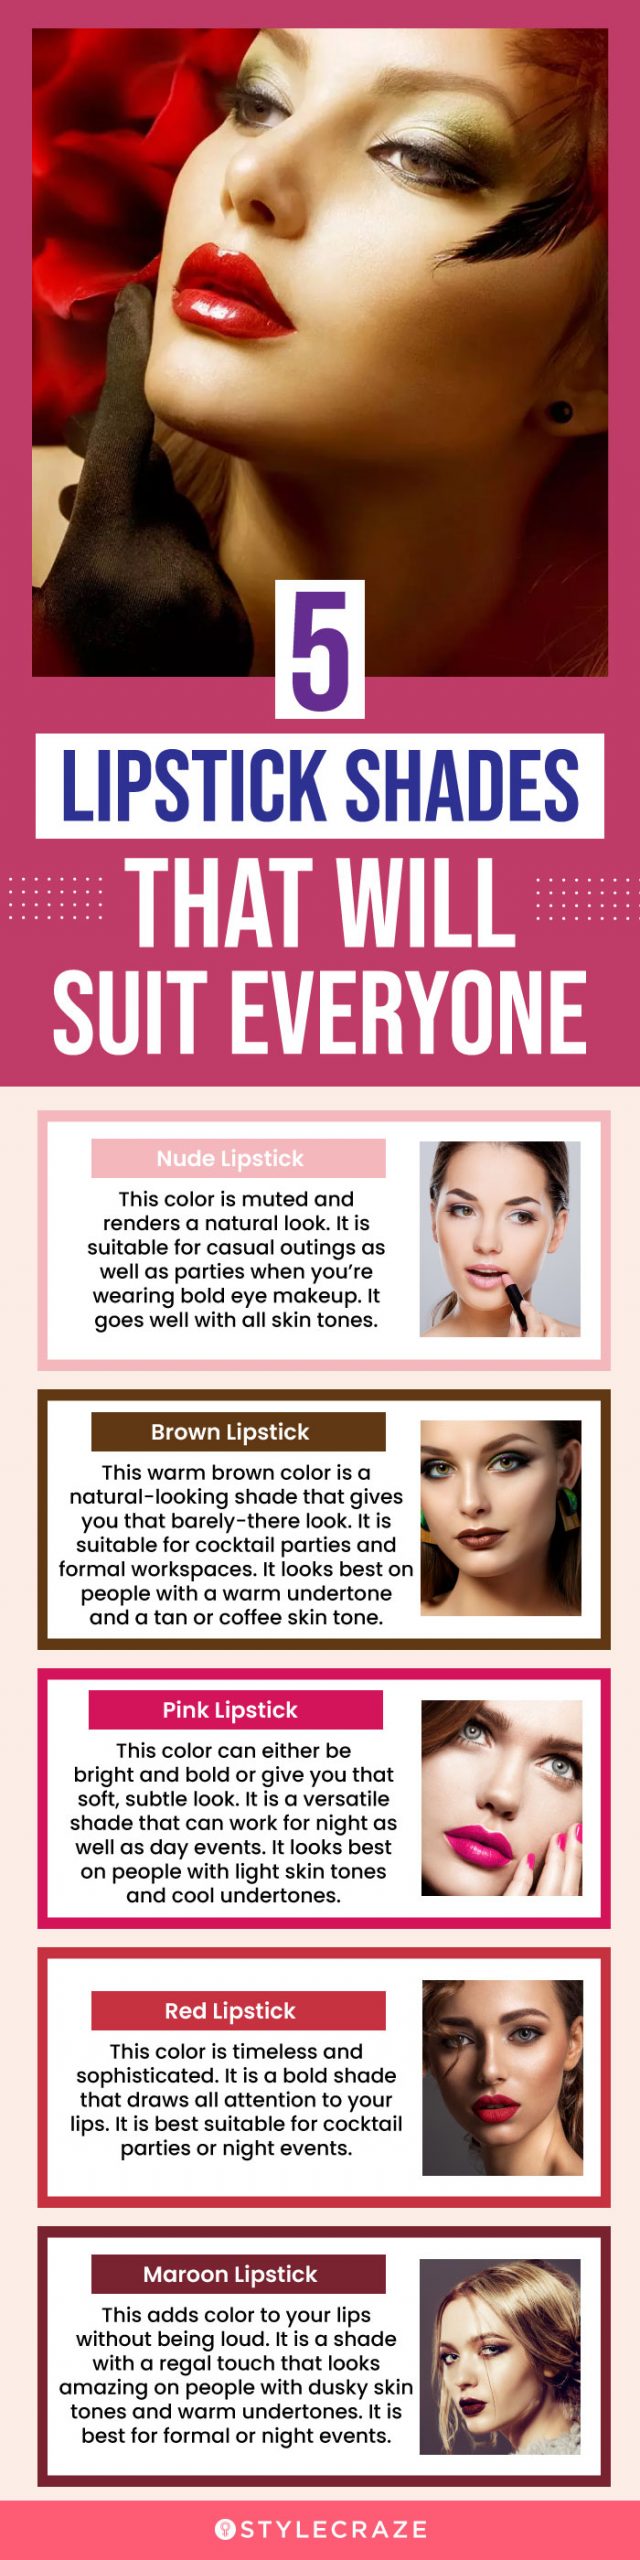 5 lipstick shades that will suit everyone (infographic)